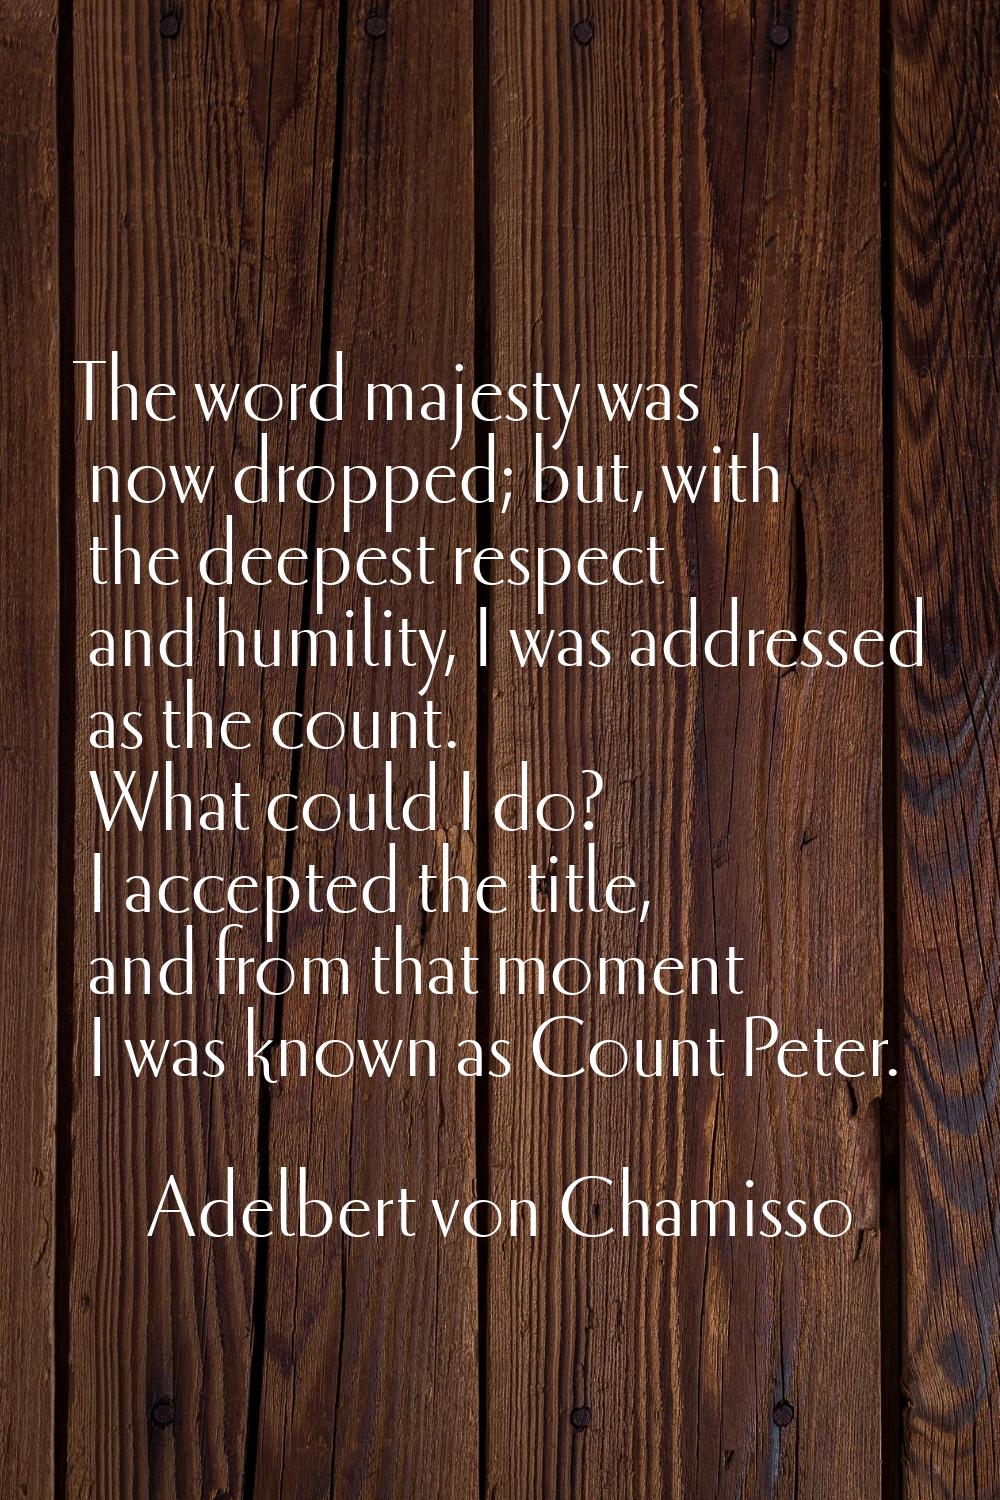 The word majesty was now dropped; but, with the deepest respect and humility, I was addressed as th